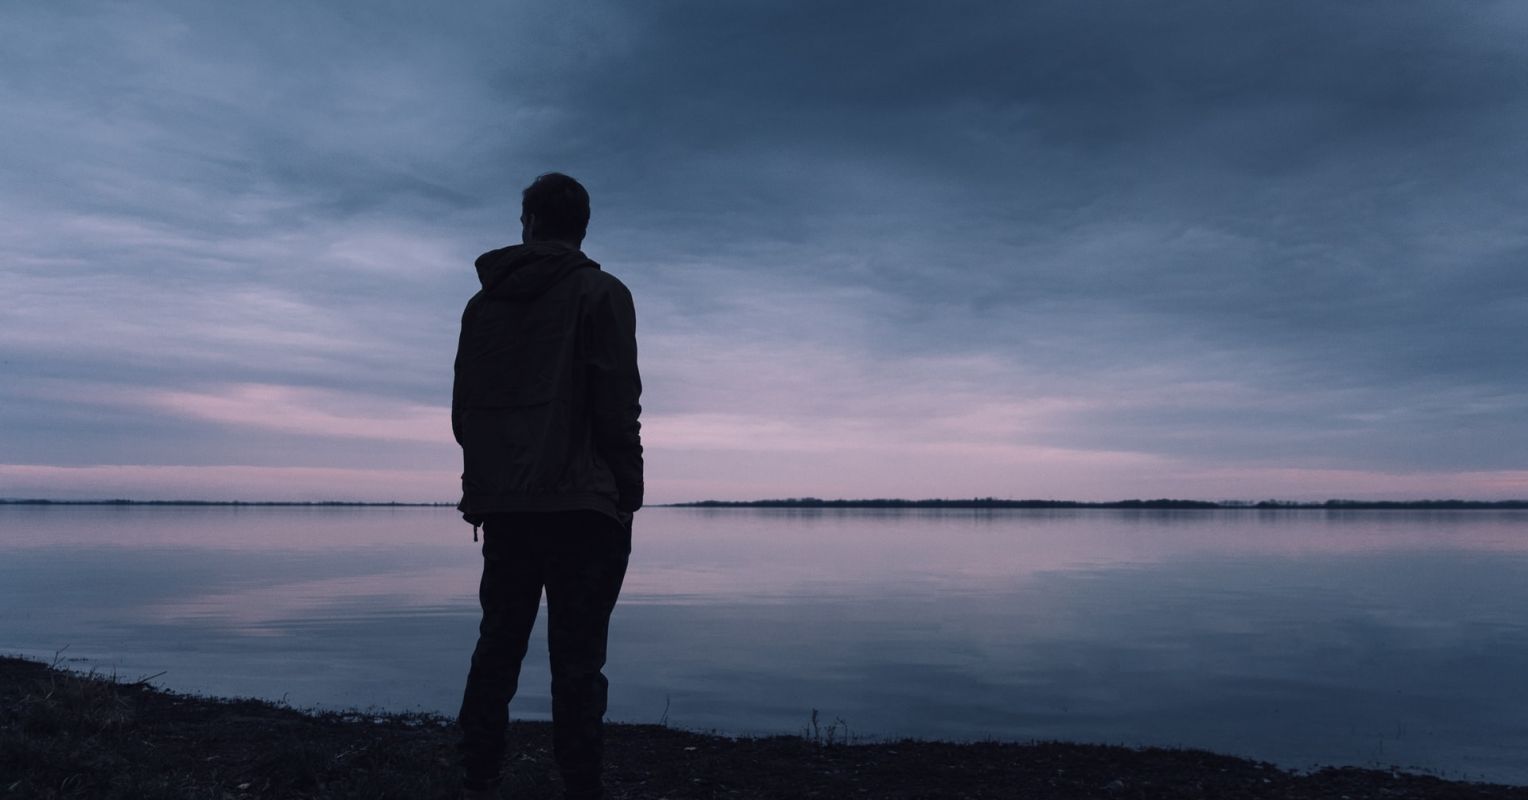 Adult Loneliness Is Linked to Childhood Trauma